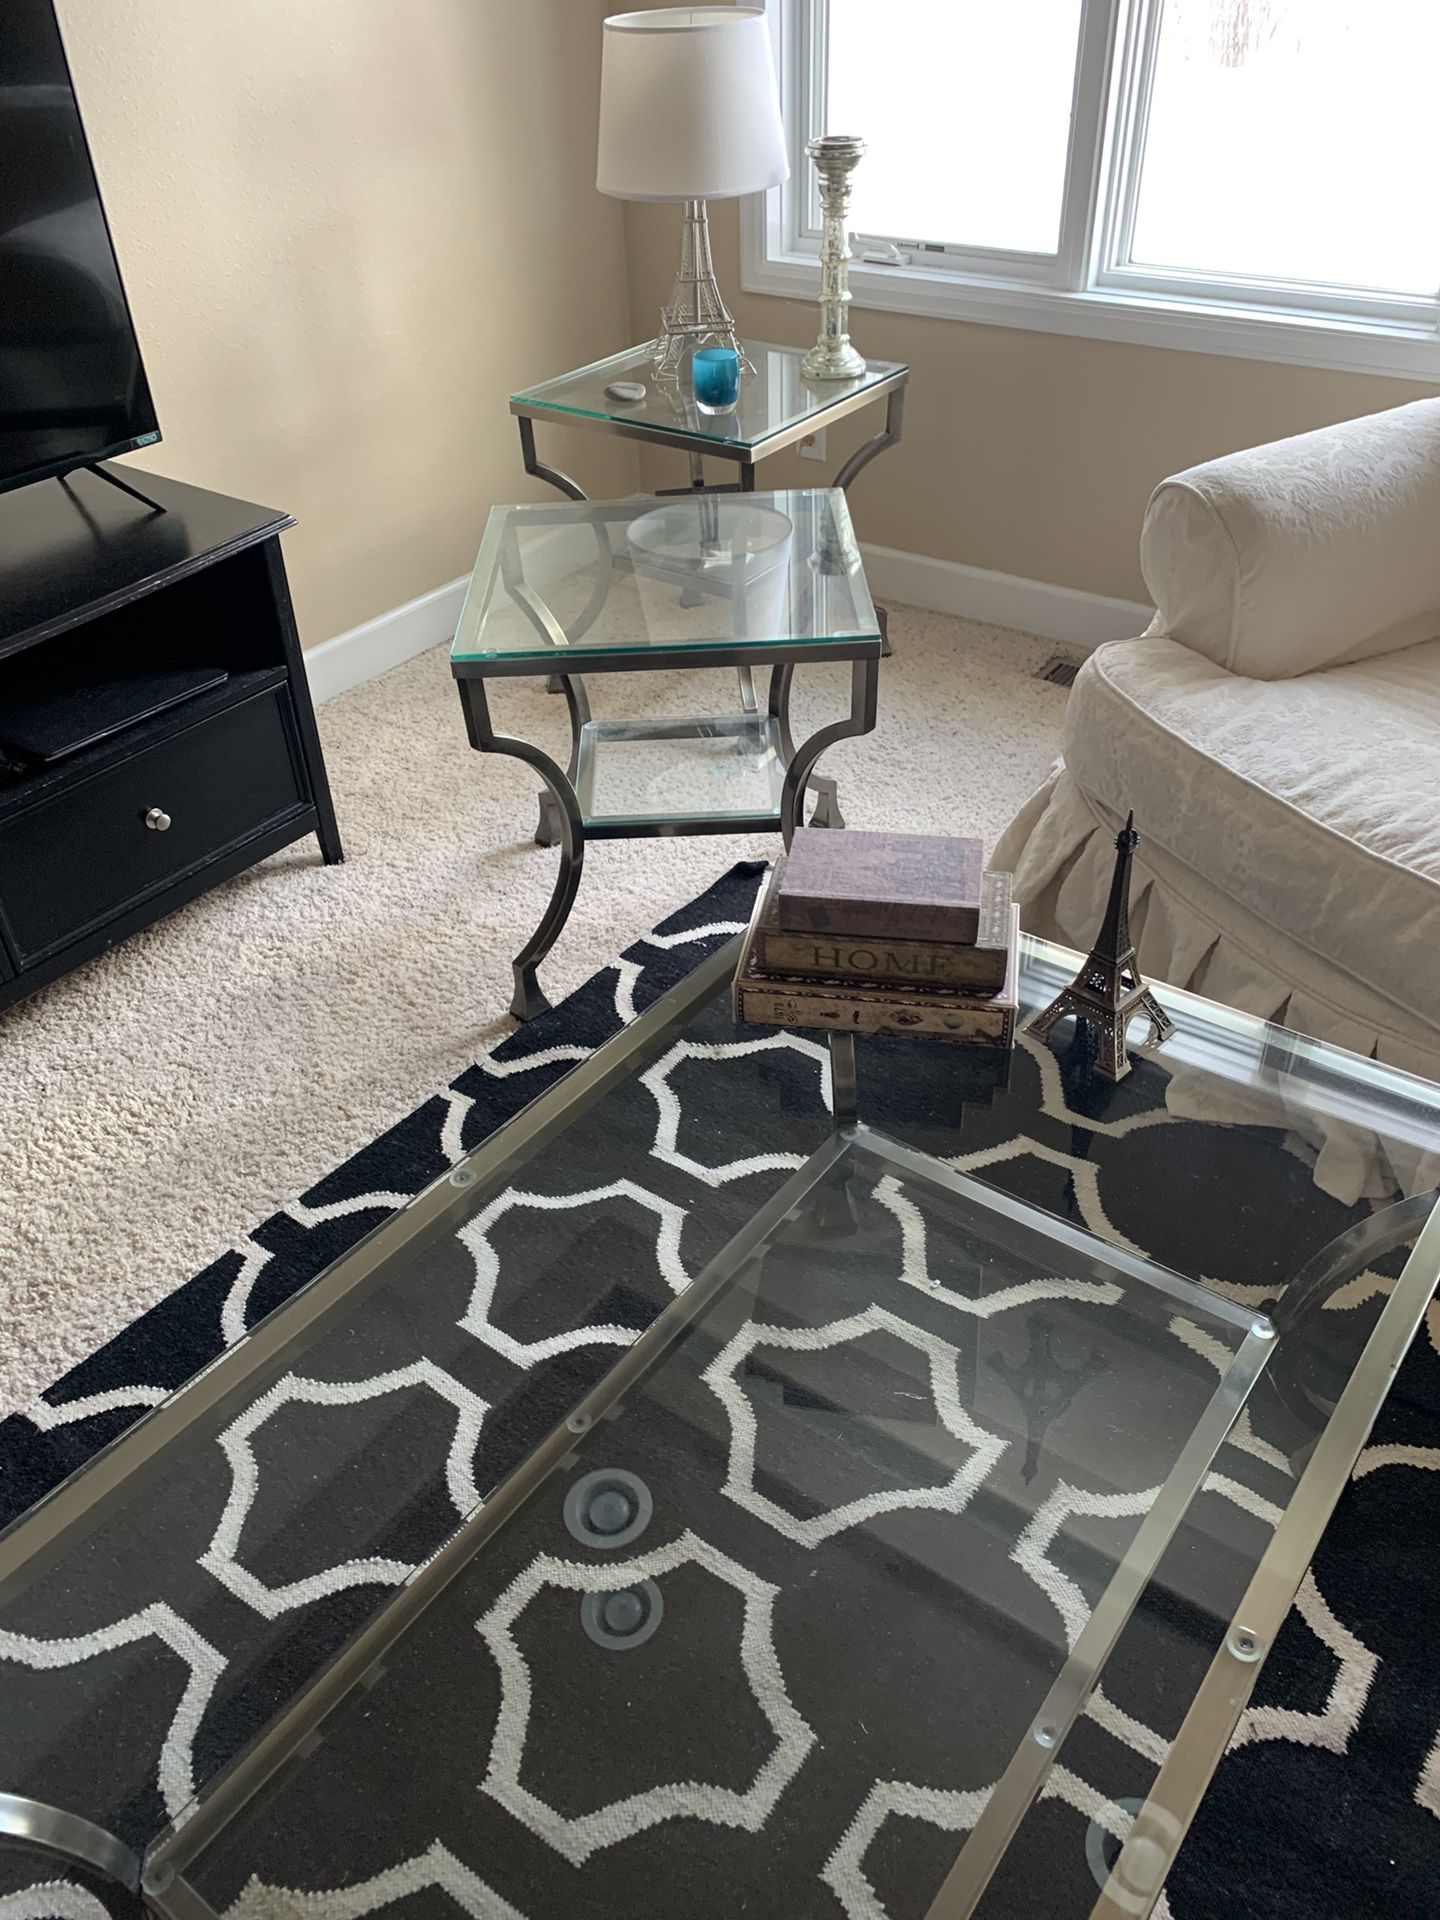 Coffee table & two end tables - glass, retro, brushed metal. $35